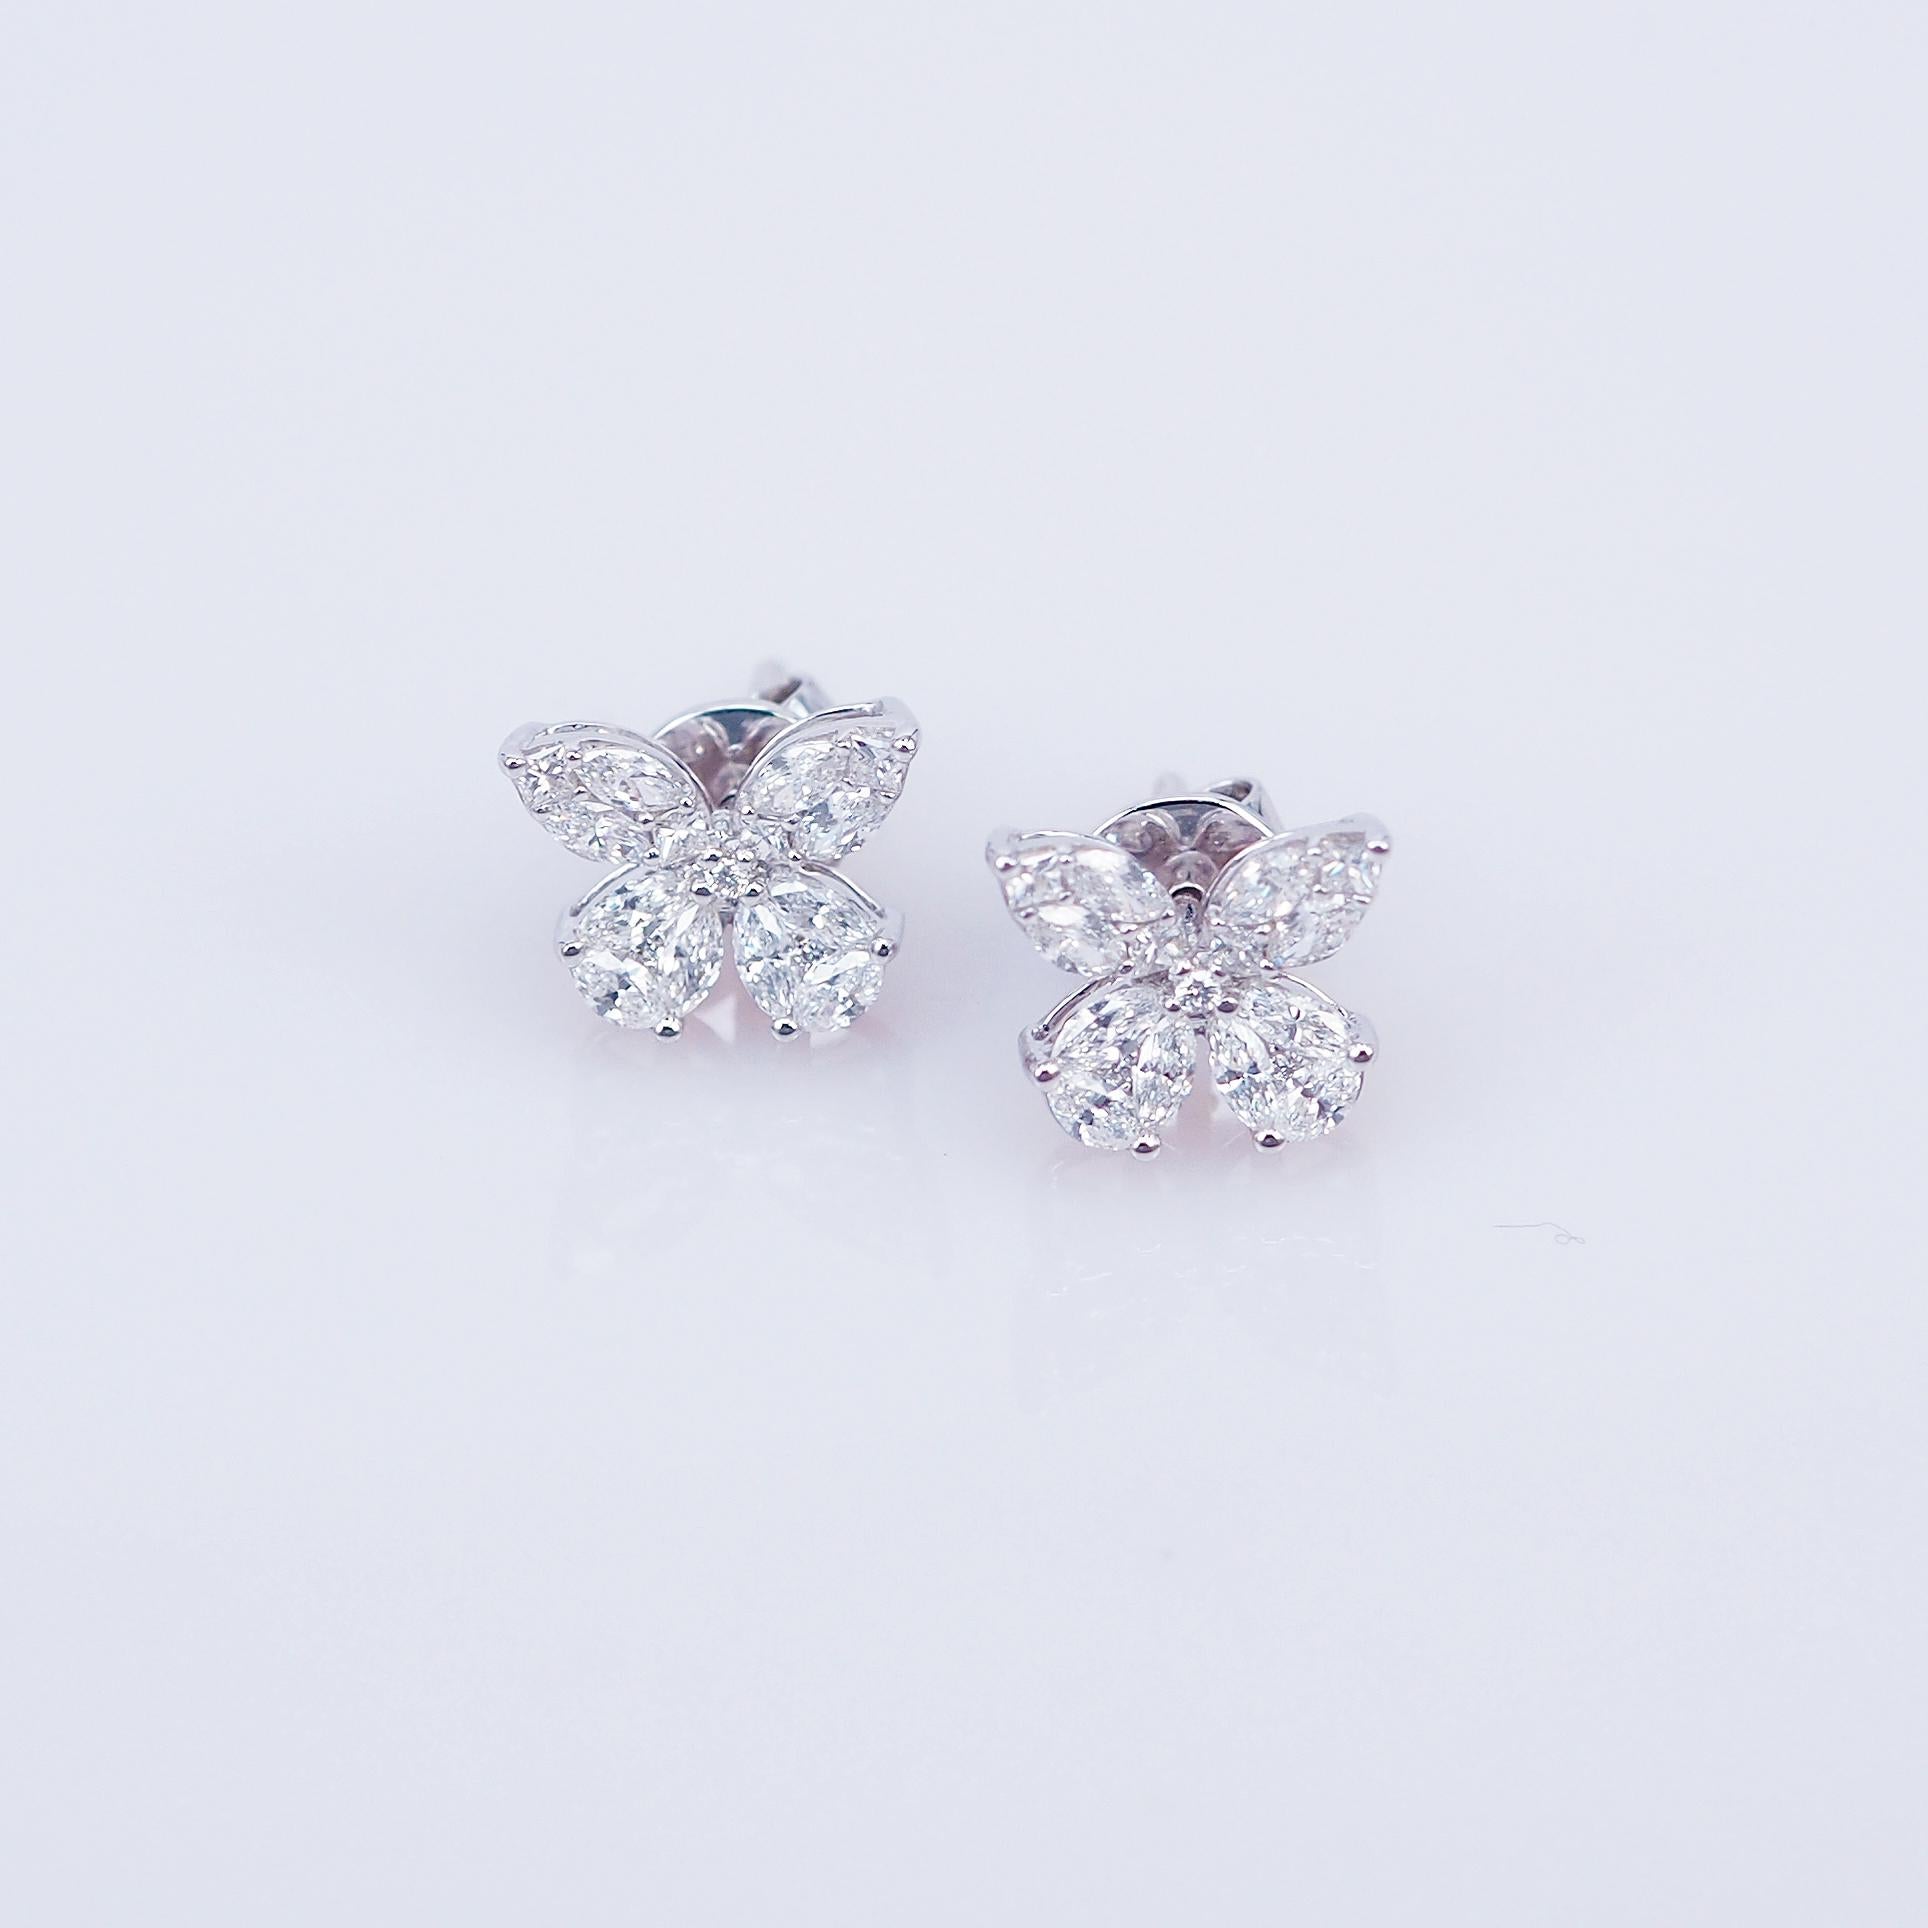 A lovely diamond earrings that you can use as everyday. Diamond use 1.06 ct G VS quality . This compose of illusion diamond put together. It look lovely and elegant in the same time. You can use as for the party and for the everyday use too. The